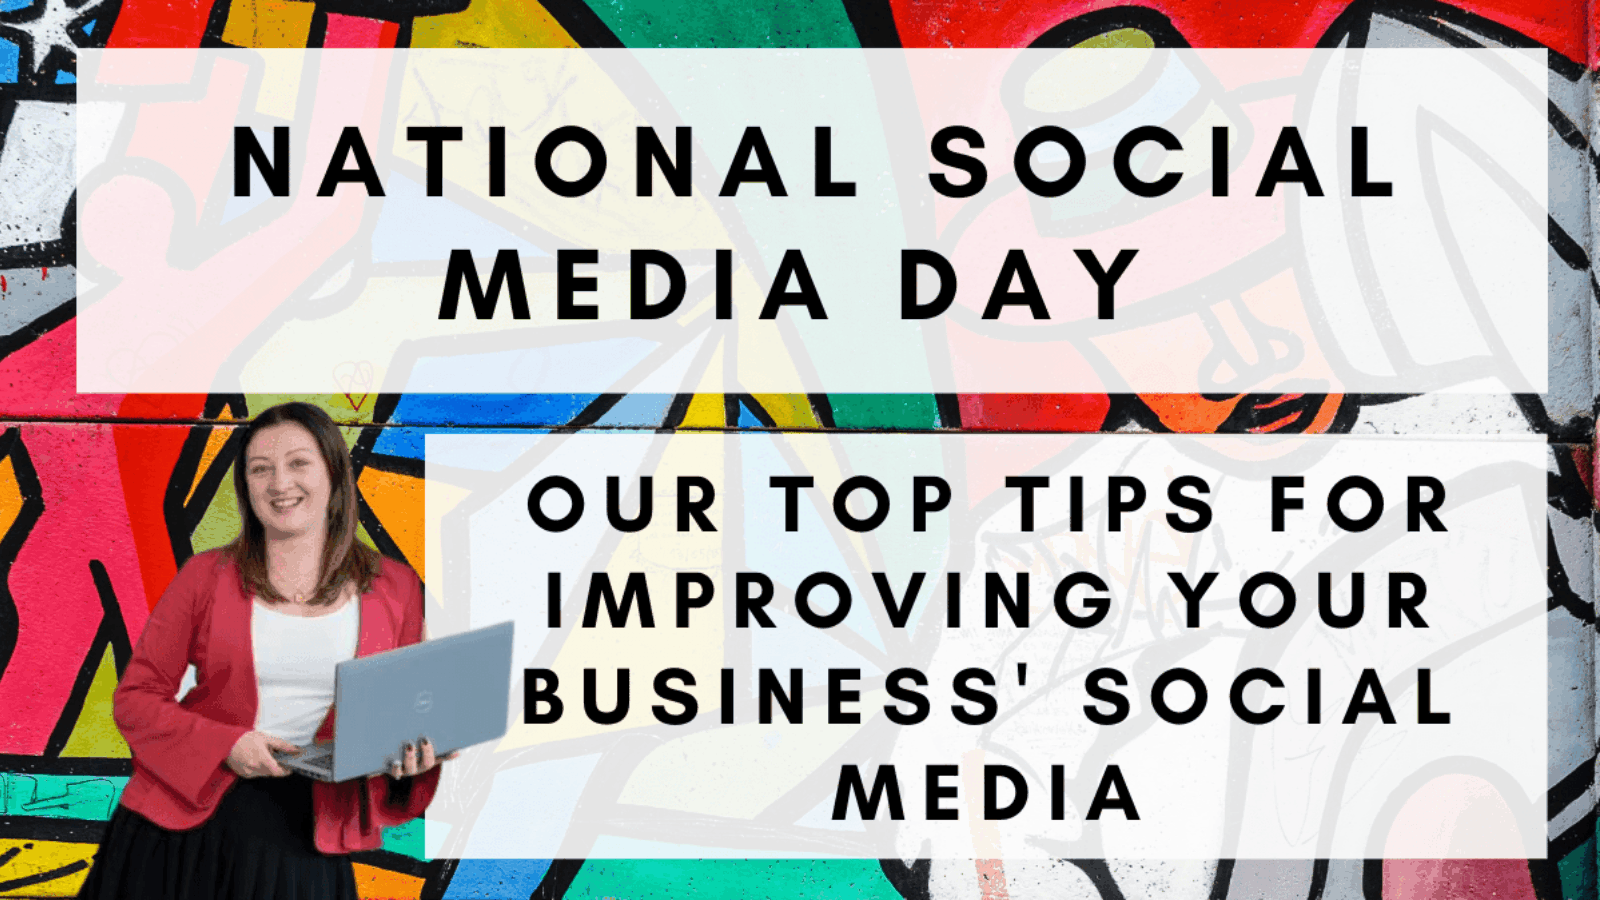 Top tips for improving your business’ social media